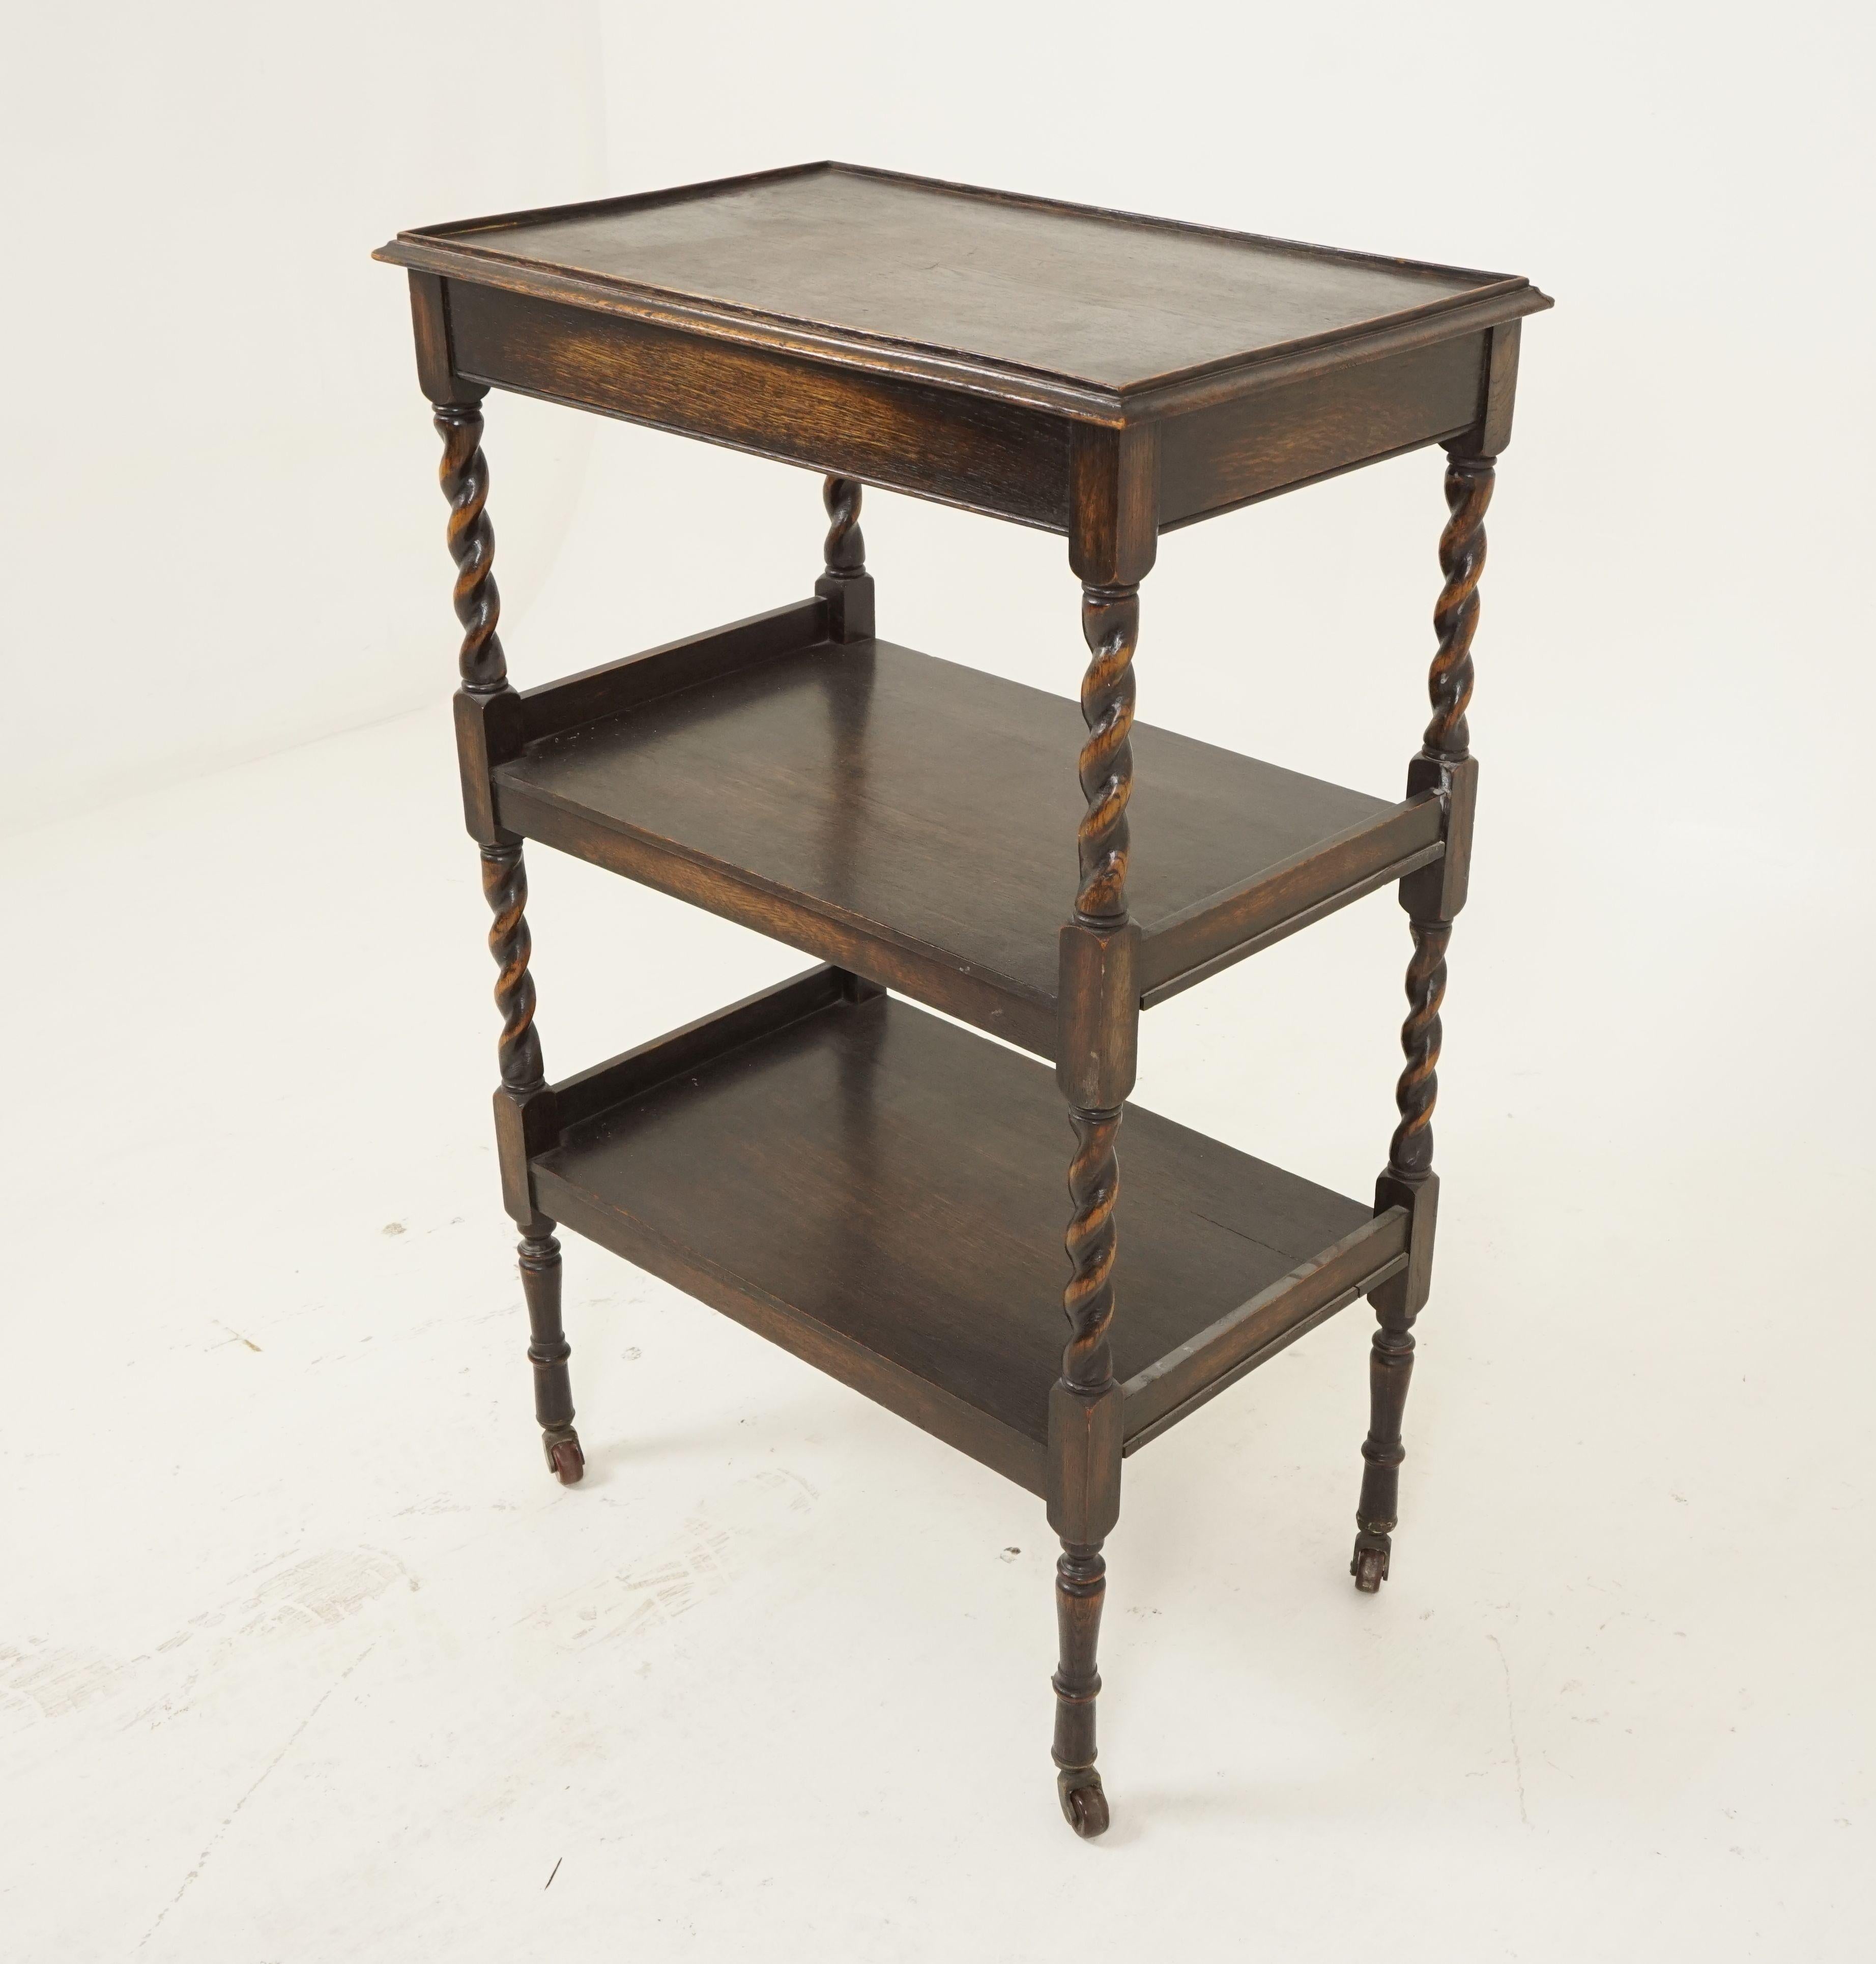 Antique 3 tiered oak barley twist stand, trolley, serving table, Scotland 1910, B2716

Scotland 1910
Solid oak
Original finish
Rectangular moulded top
Small gallery on all sides
Two undershelves below
All standing on tall barley twist